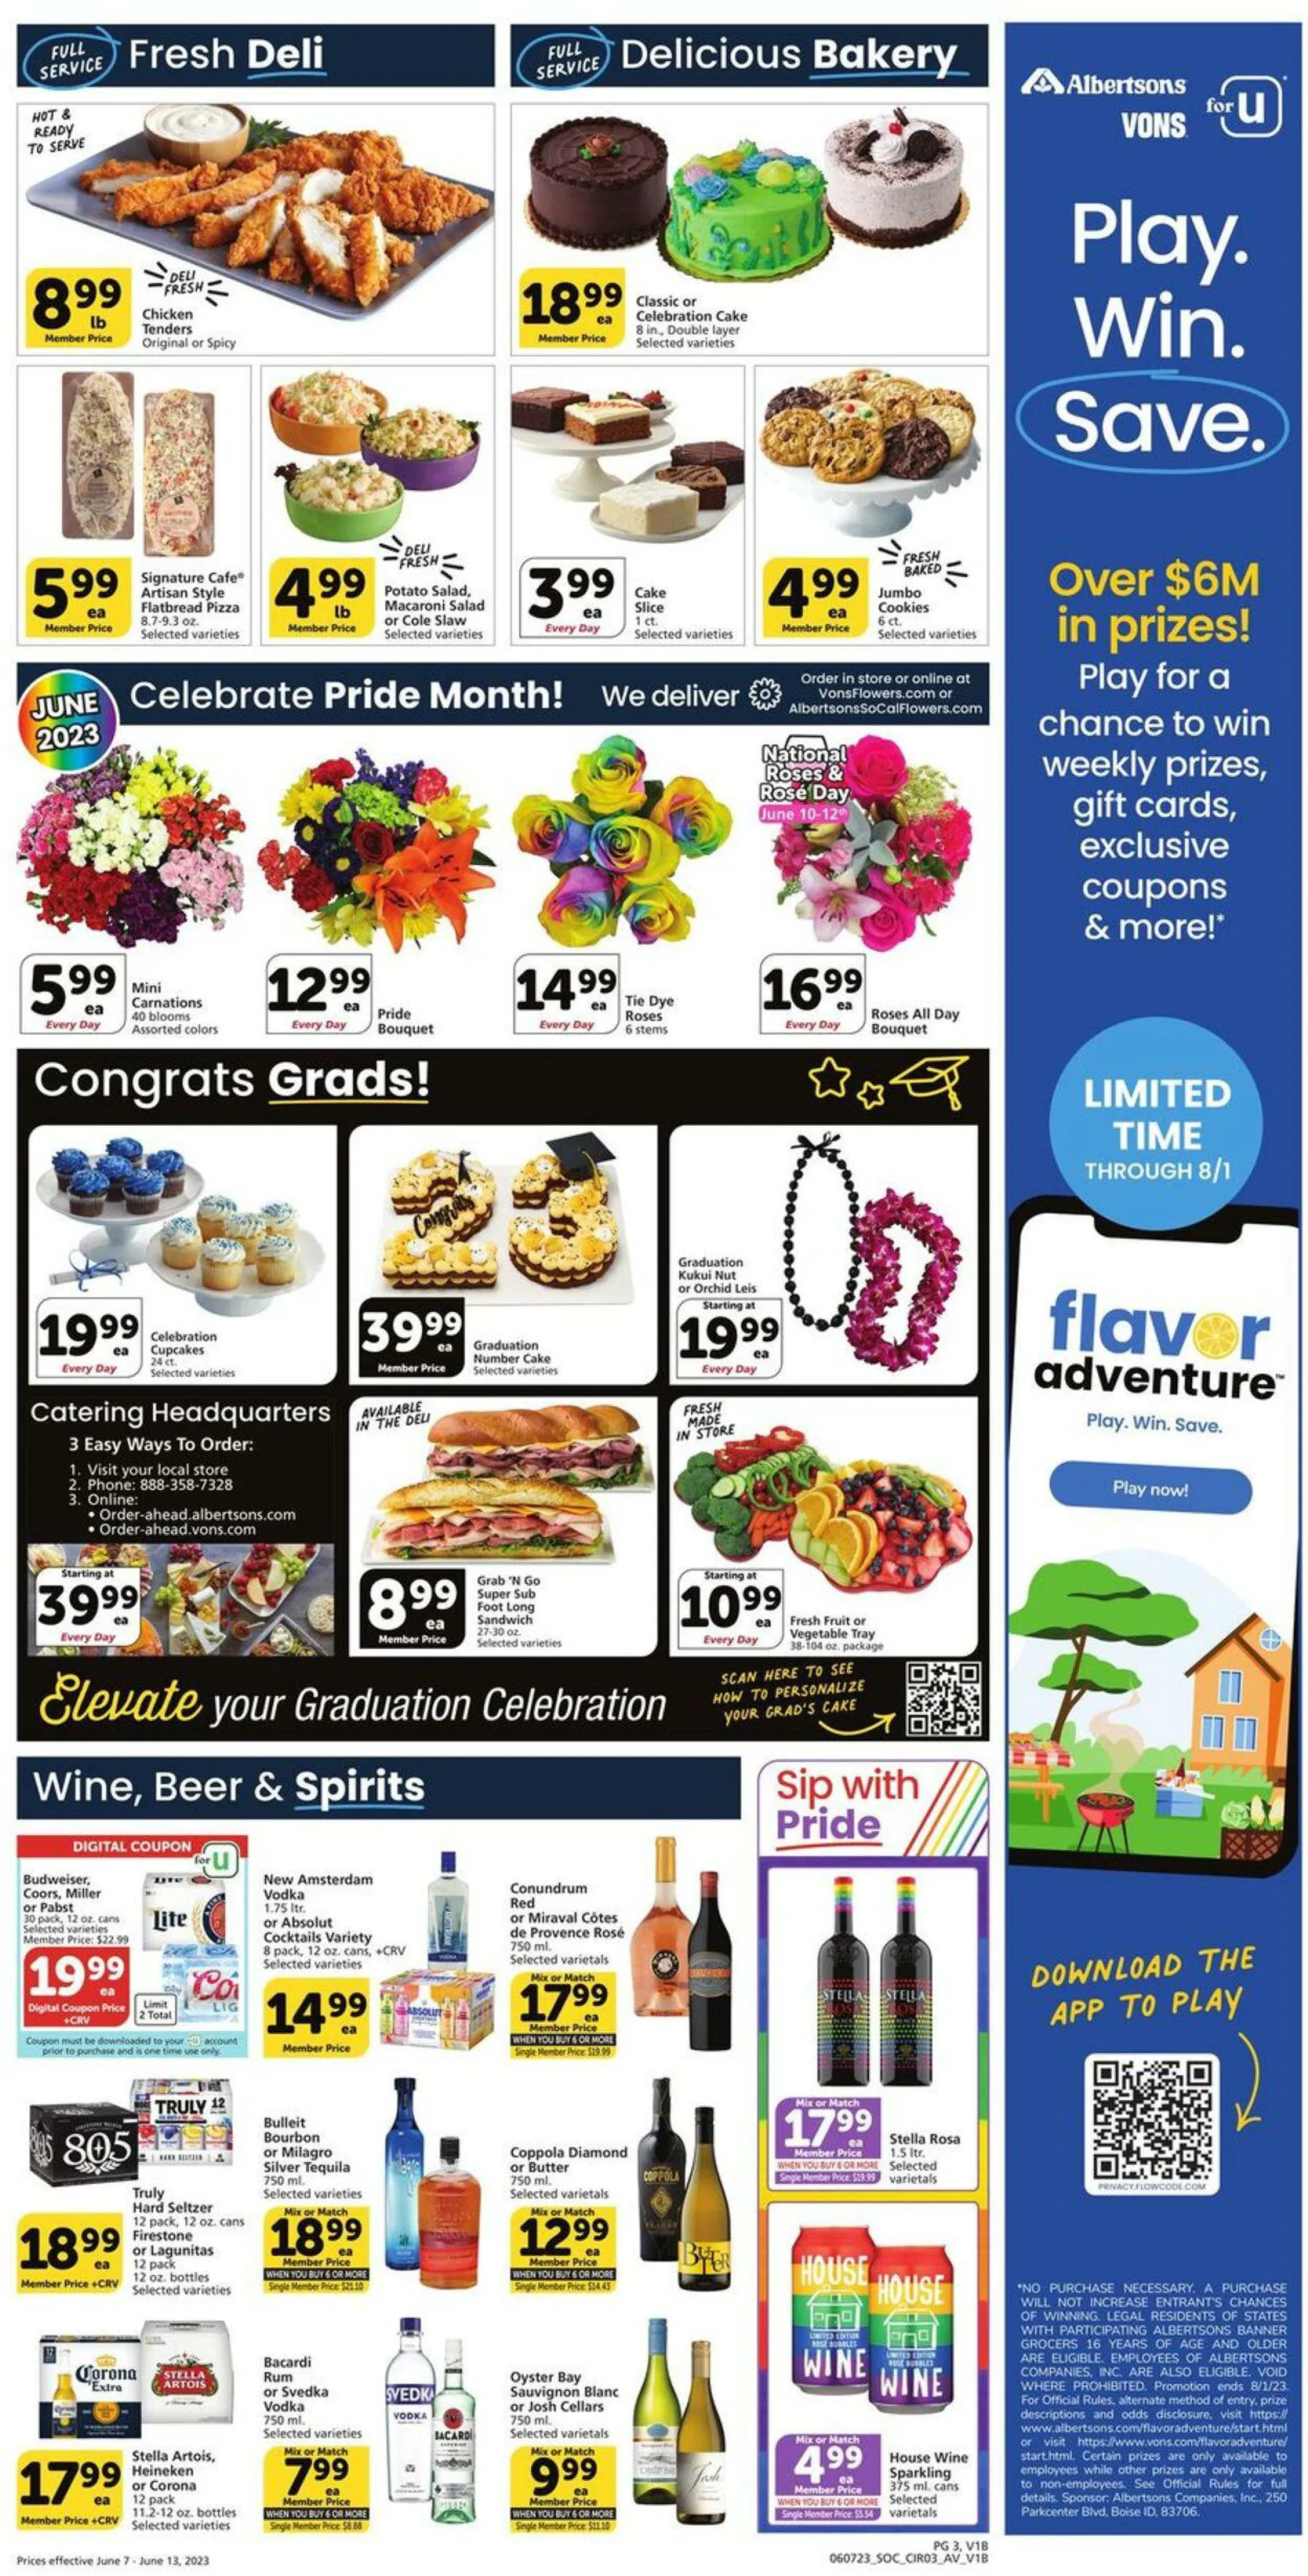 Vons Current weekly ad - 3